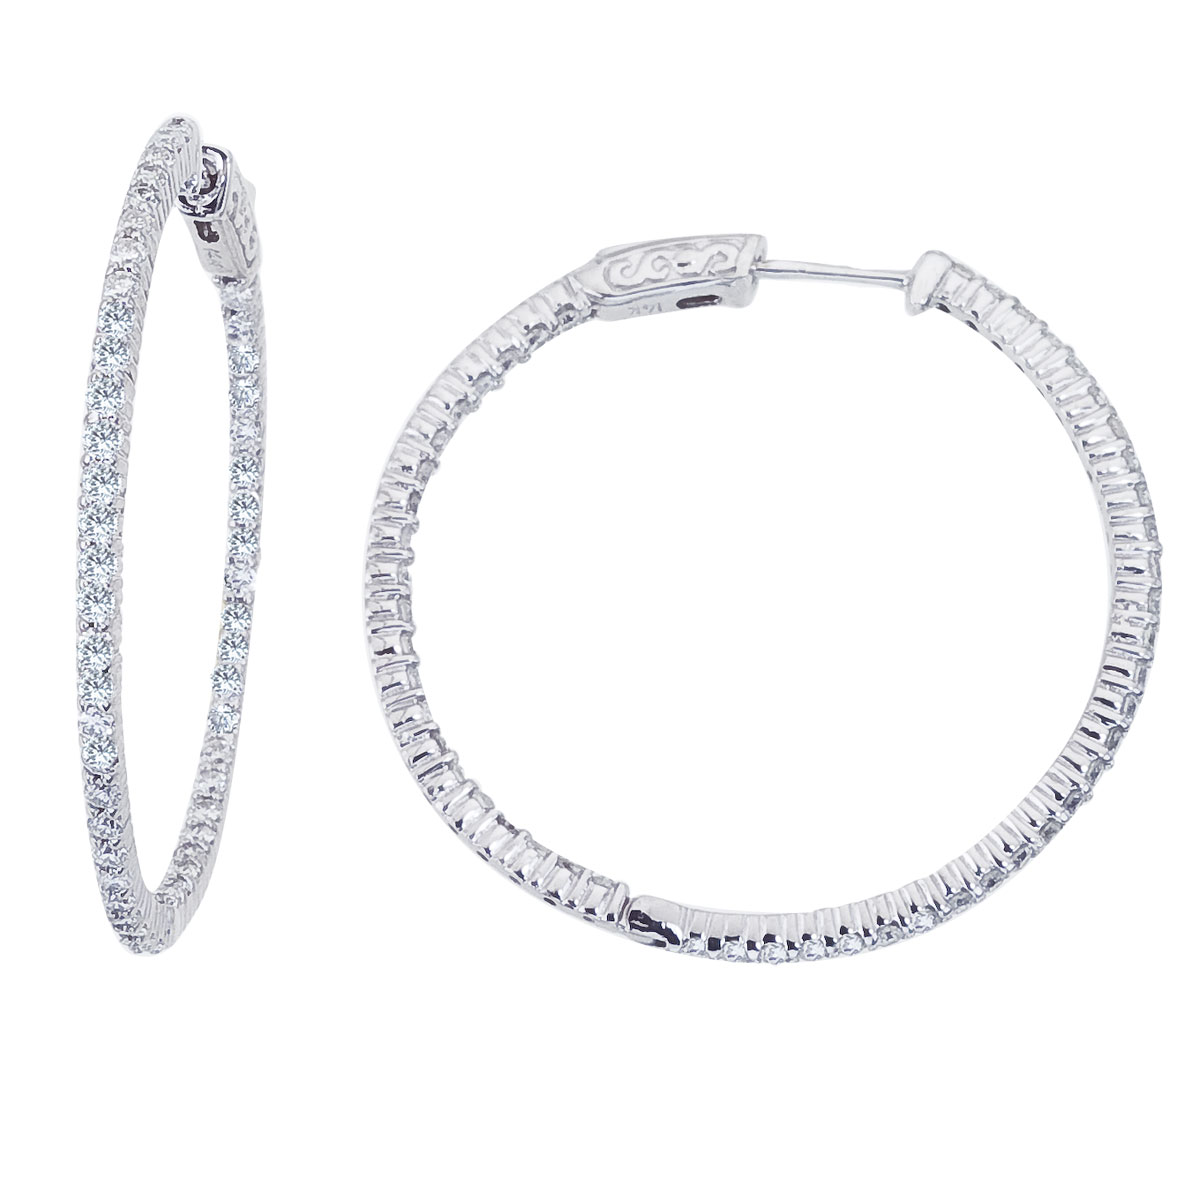 JCX2496: These 35x35 mm patented secure lock inside-outside diamond hoop earrings feature 2 carats of stunning diamonds.